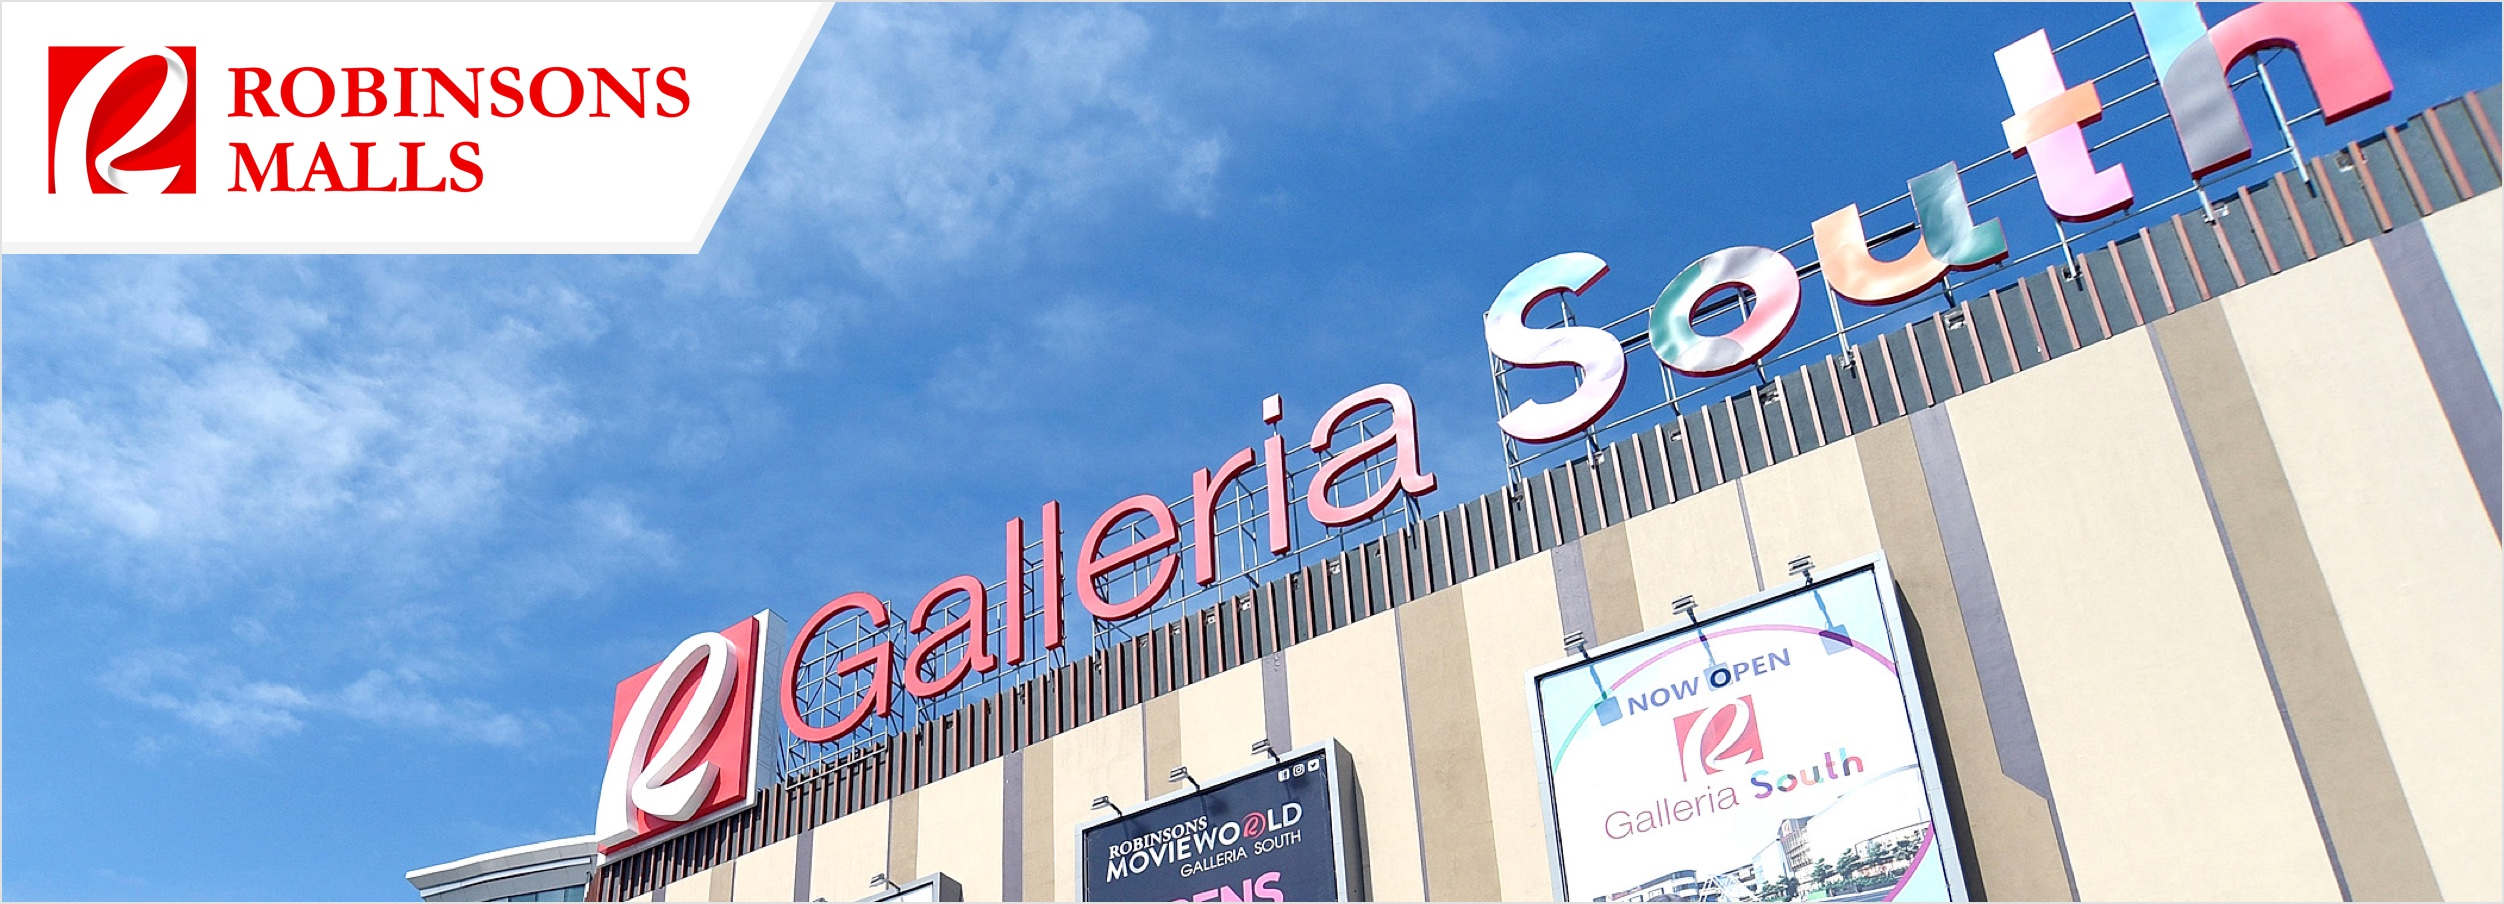 Now Open: Robinsons Galleria South